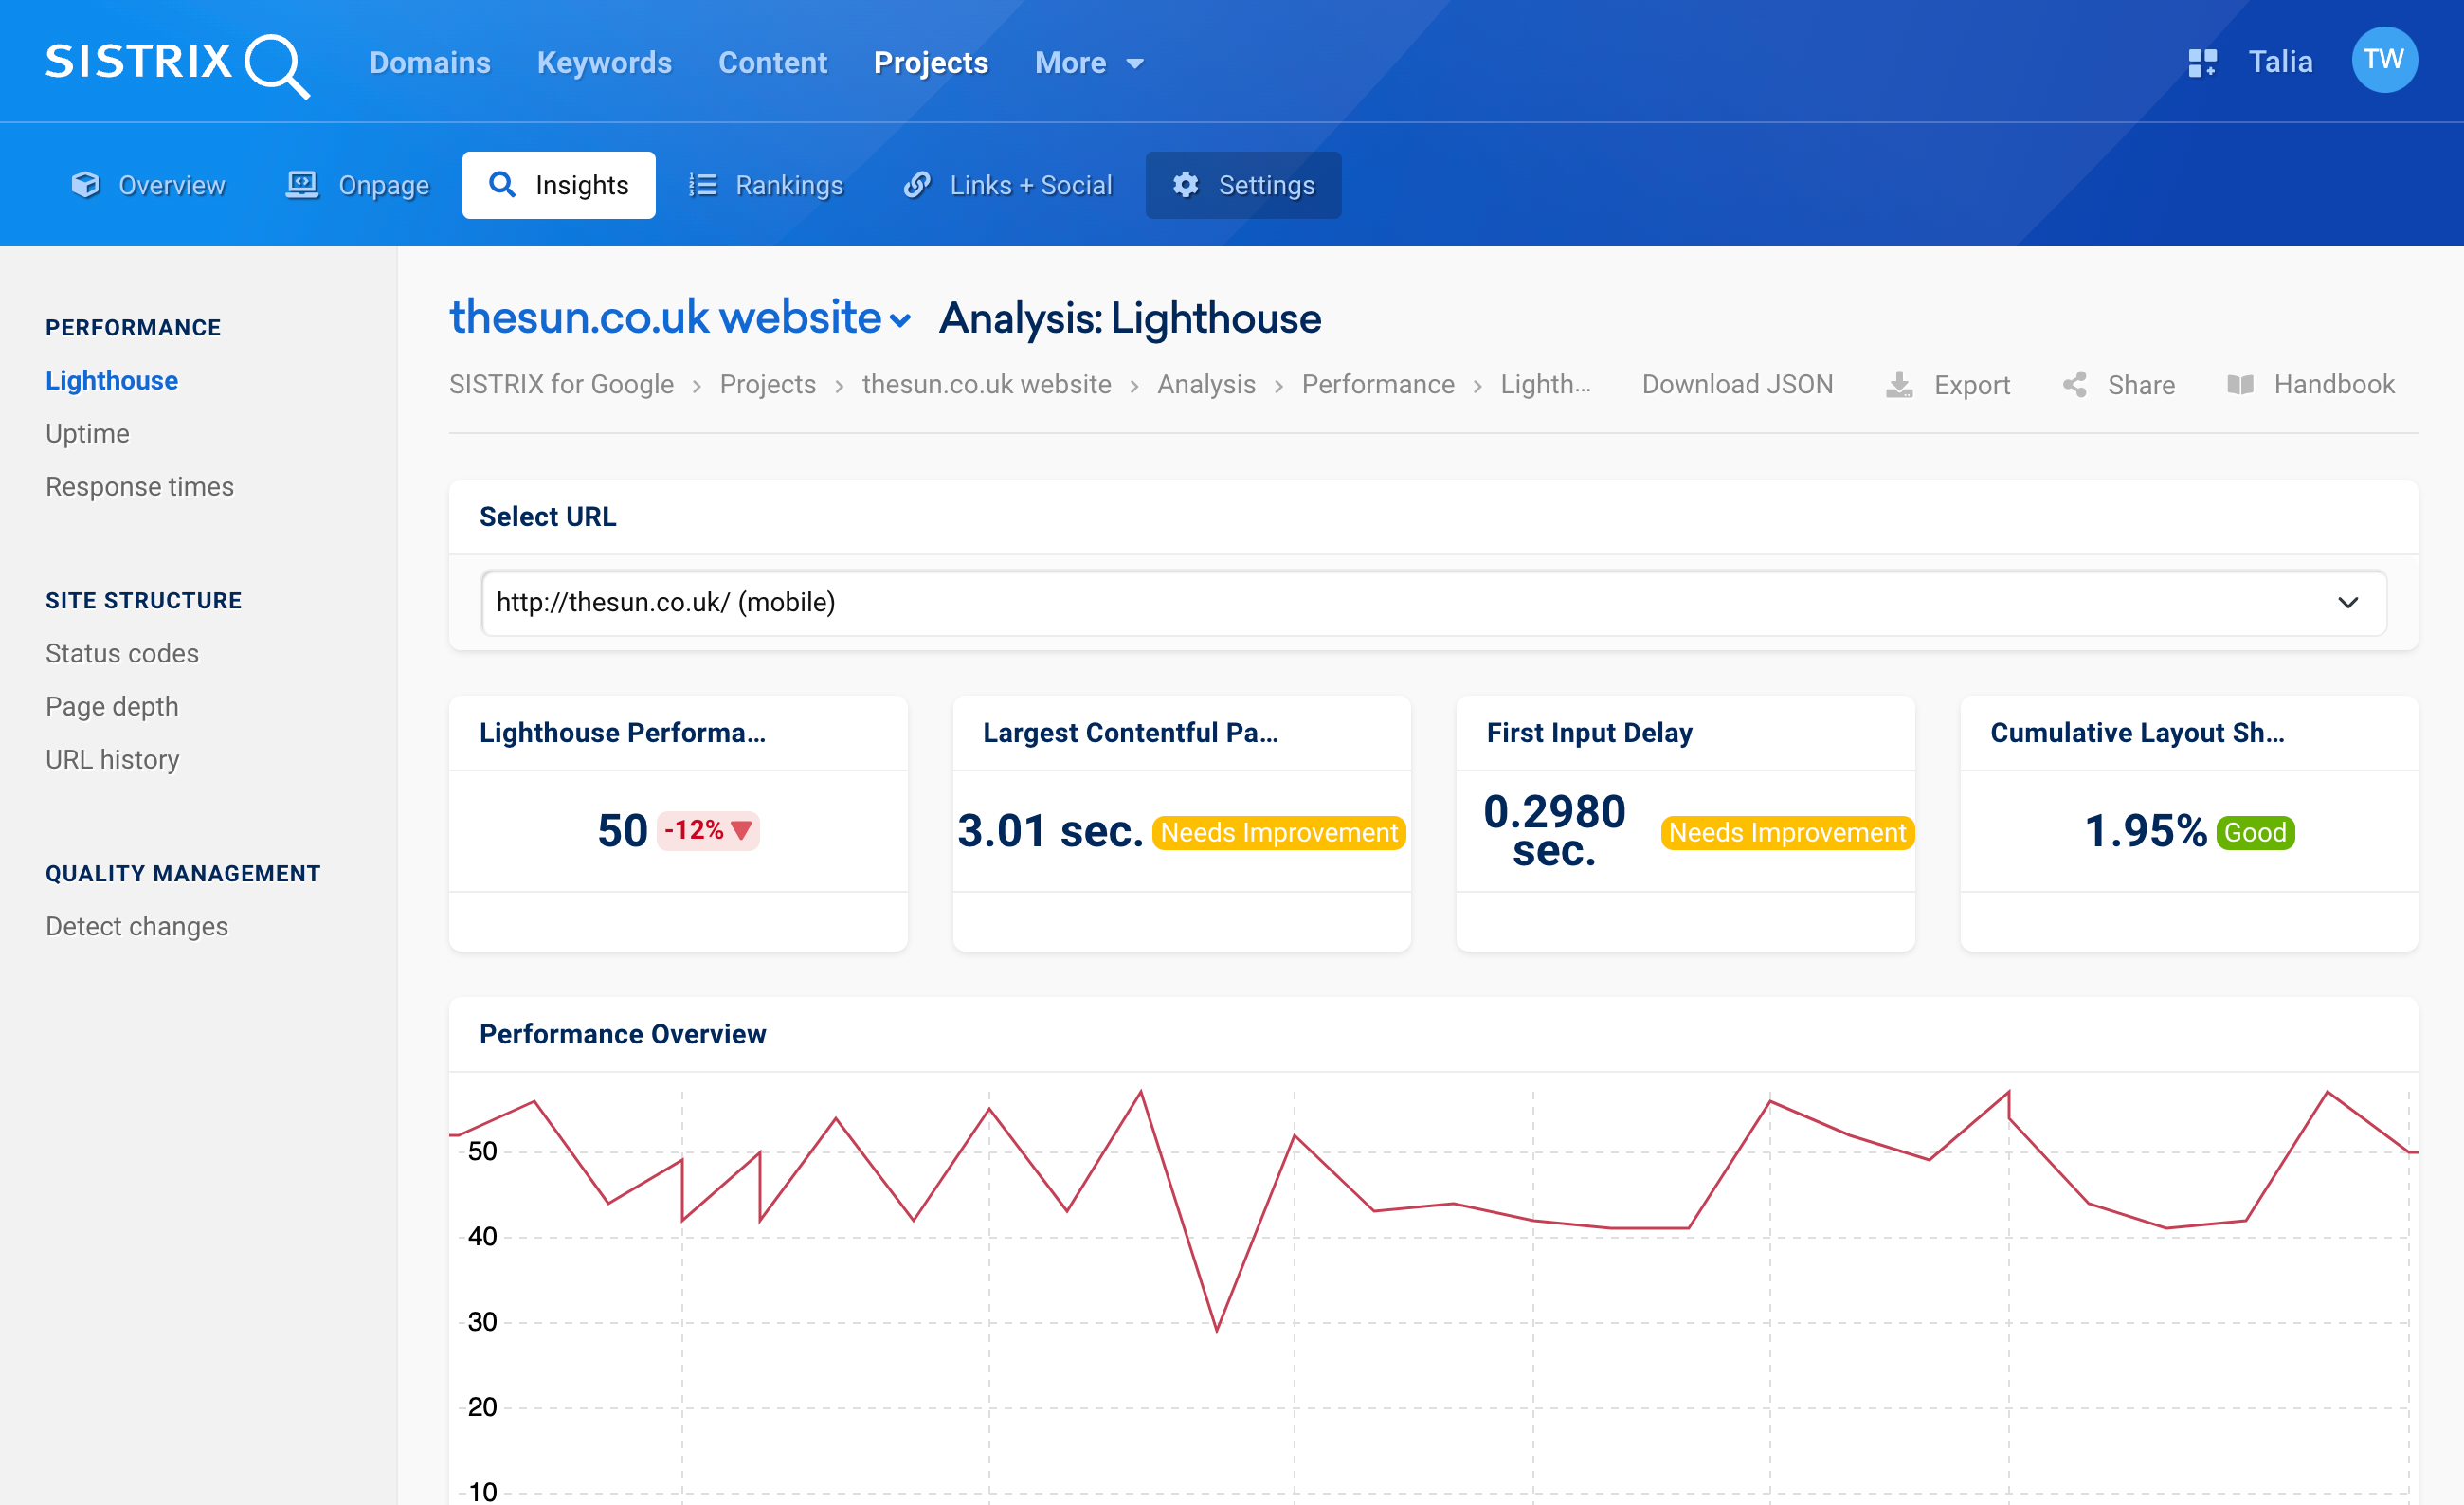 Overview of the Lighthouse analysis of the URL http://thesun.co.uk/ in SISTRIX.